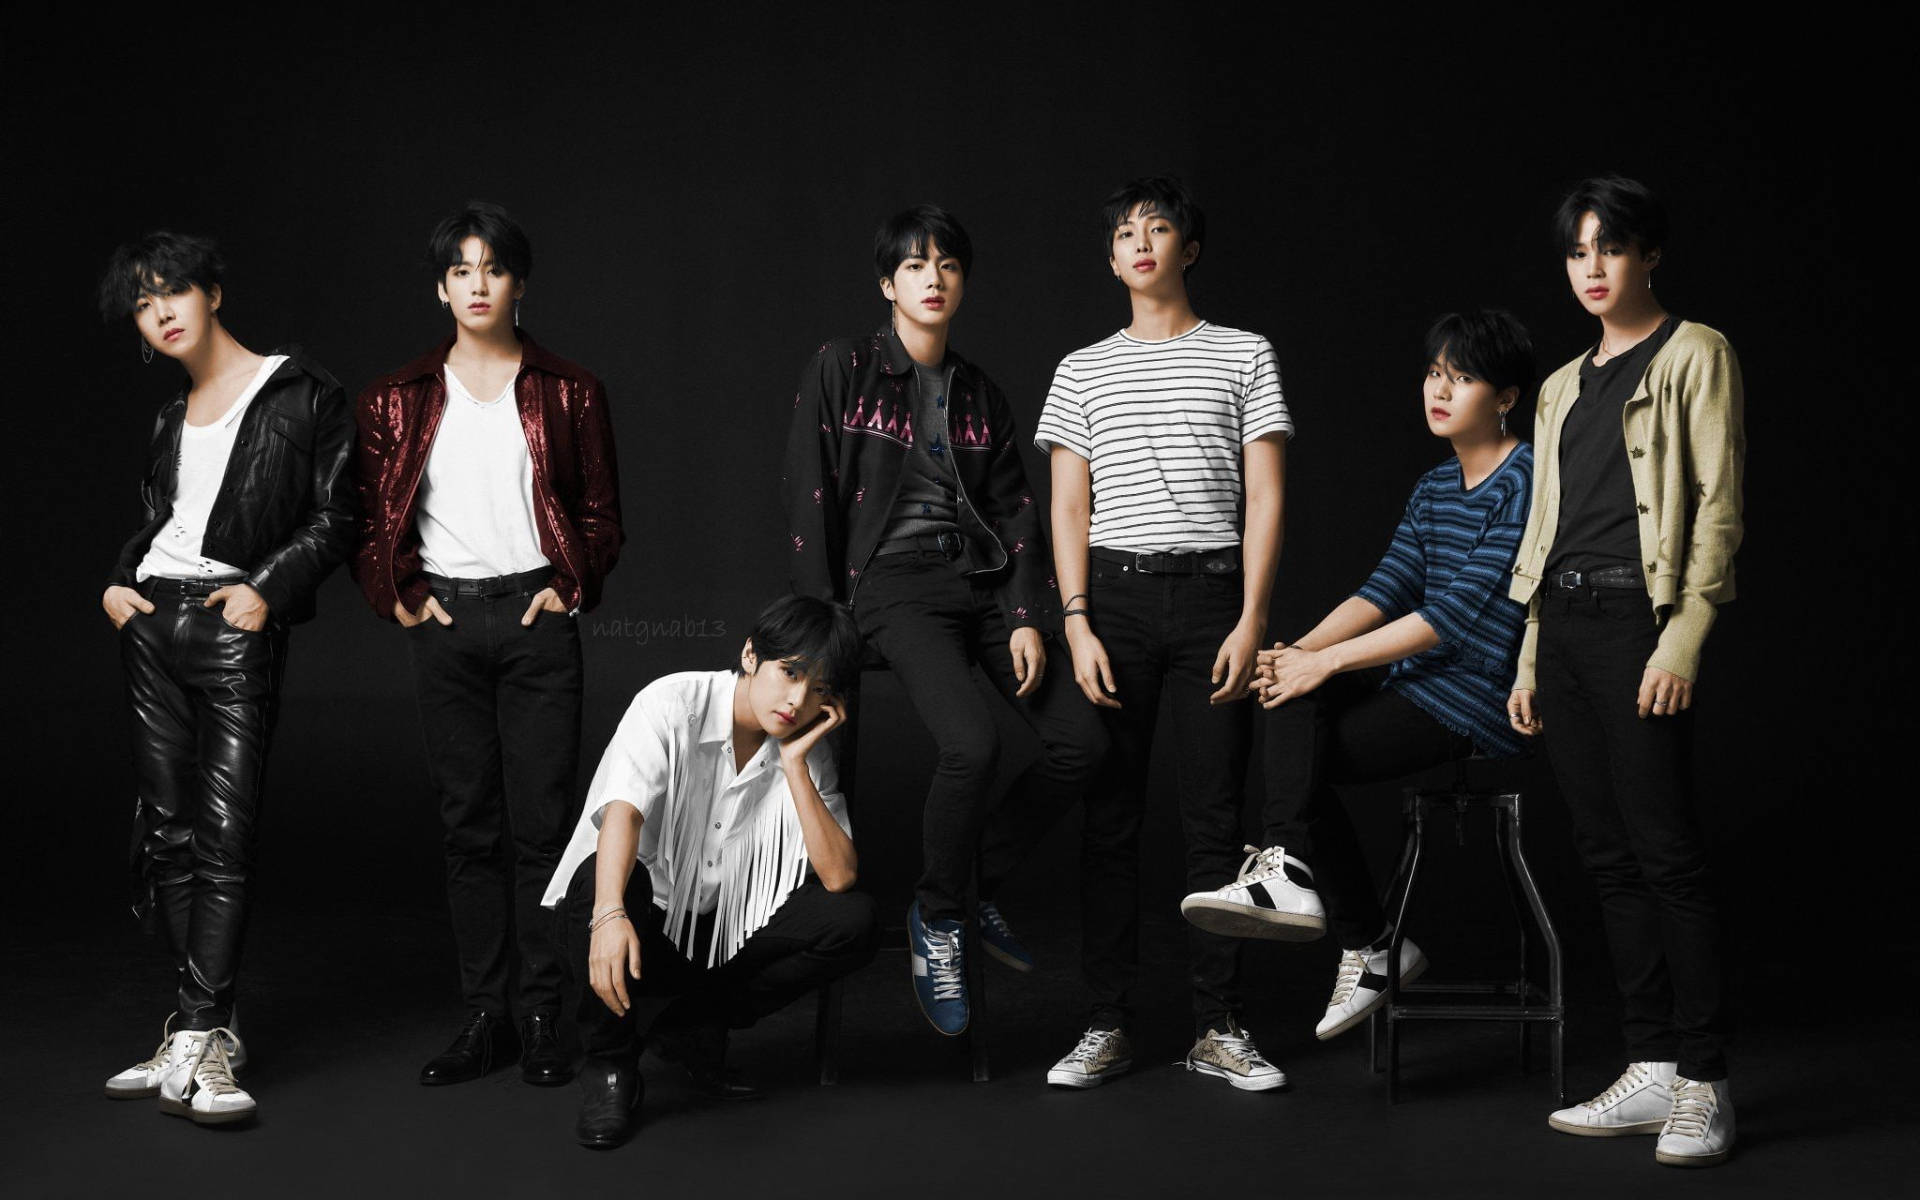 1920x1200 Download Stylish Bts Group Photo In Black Wallpaper